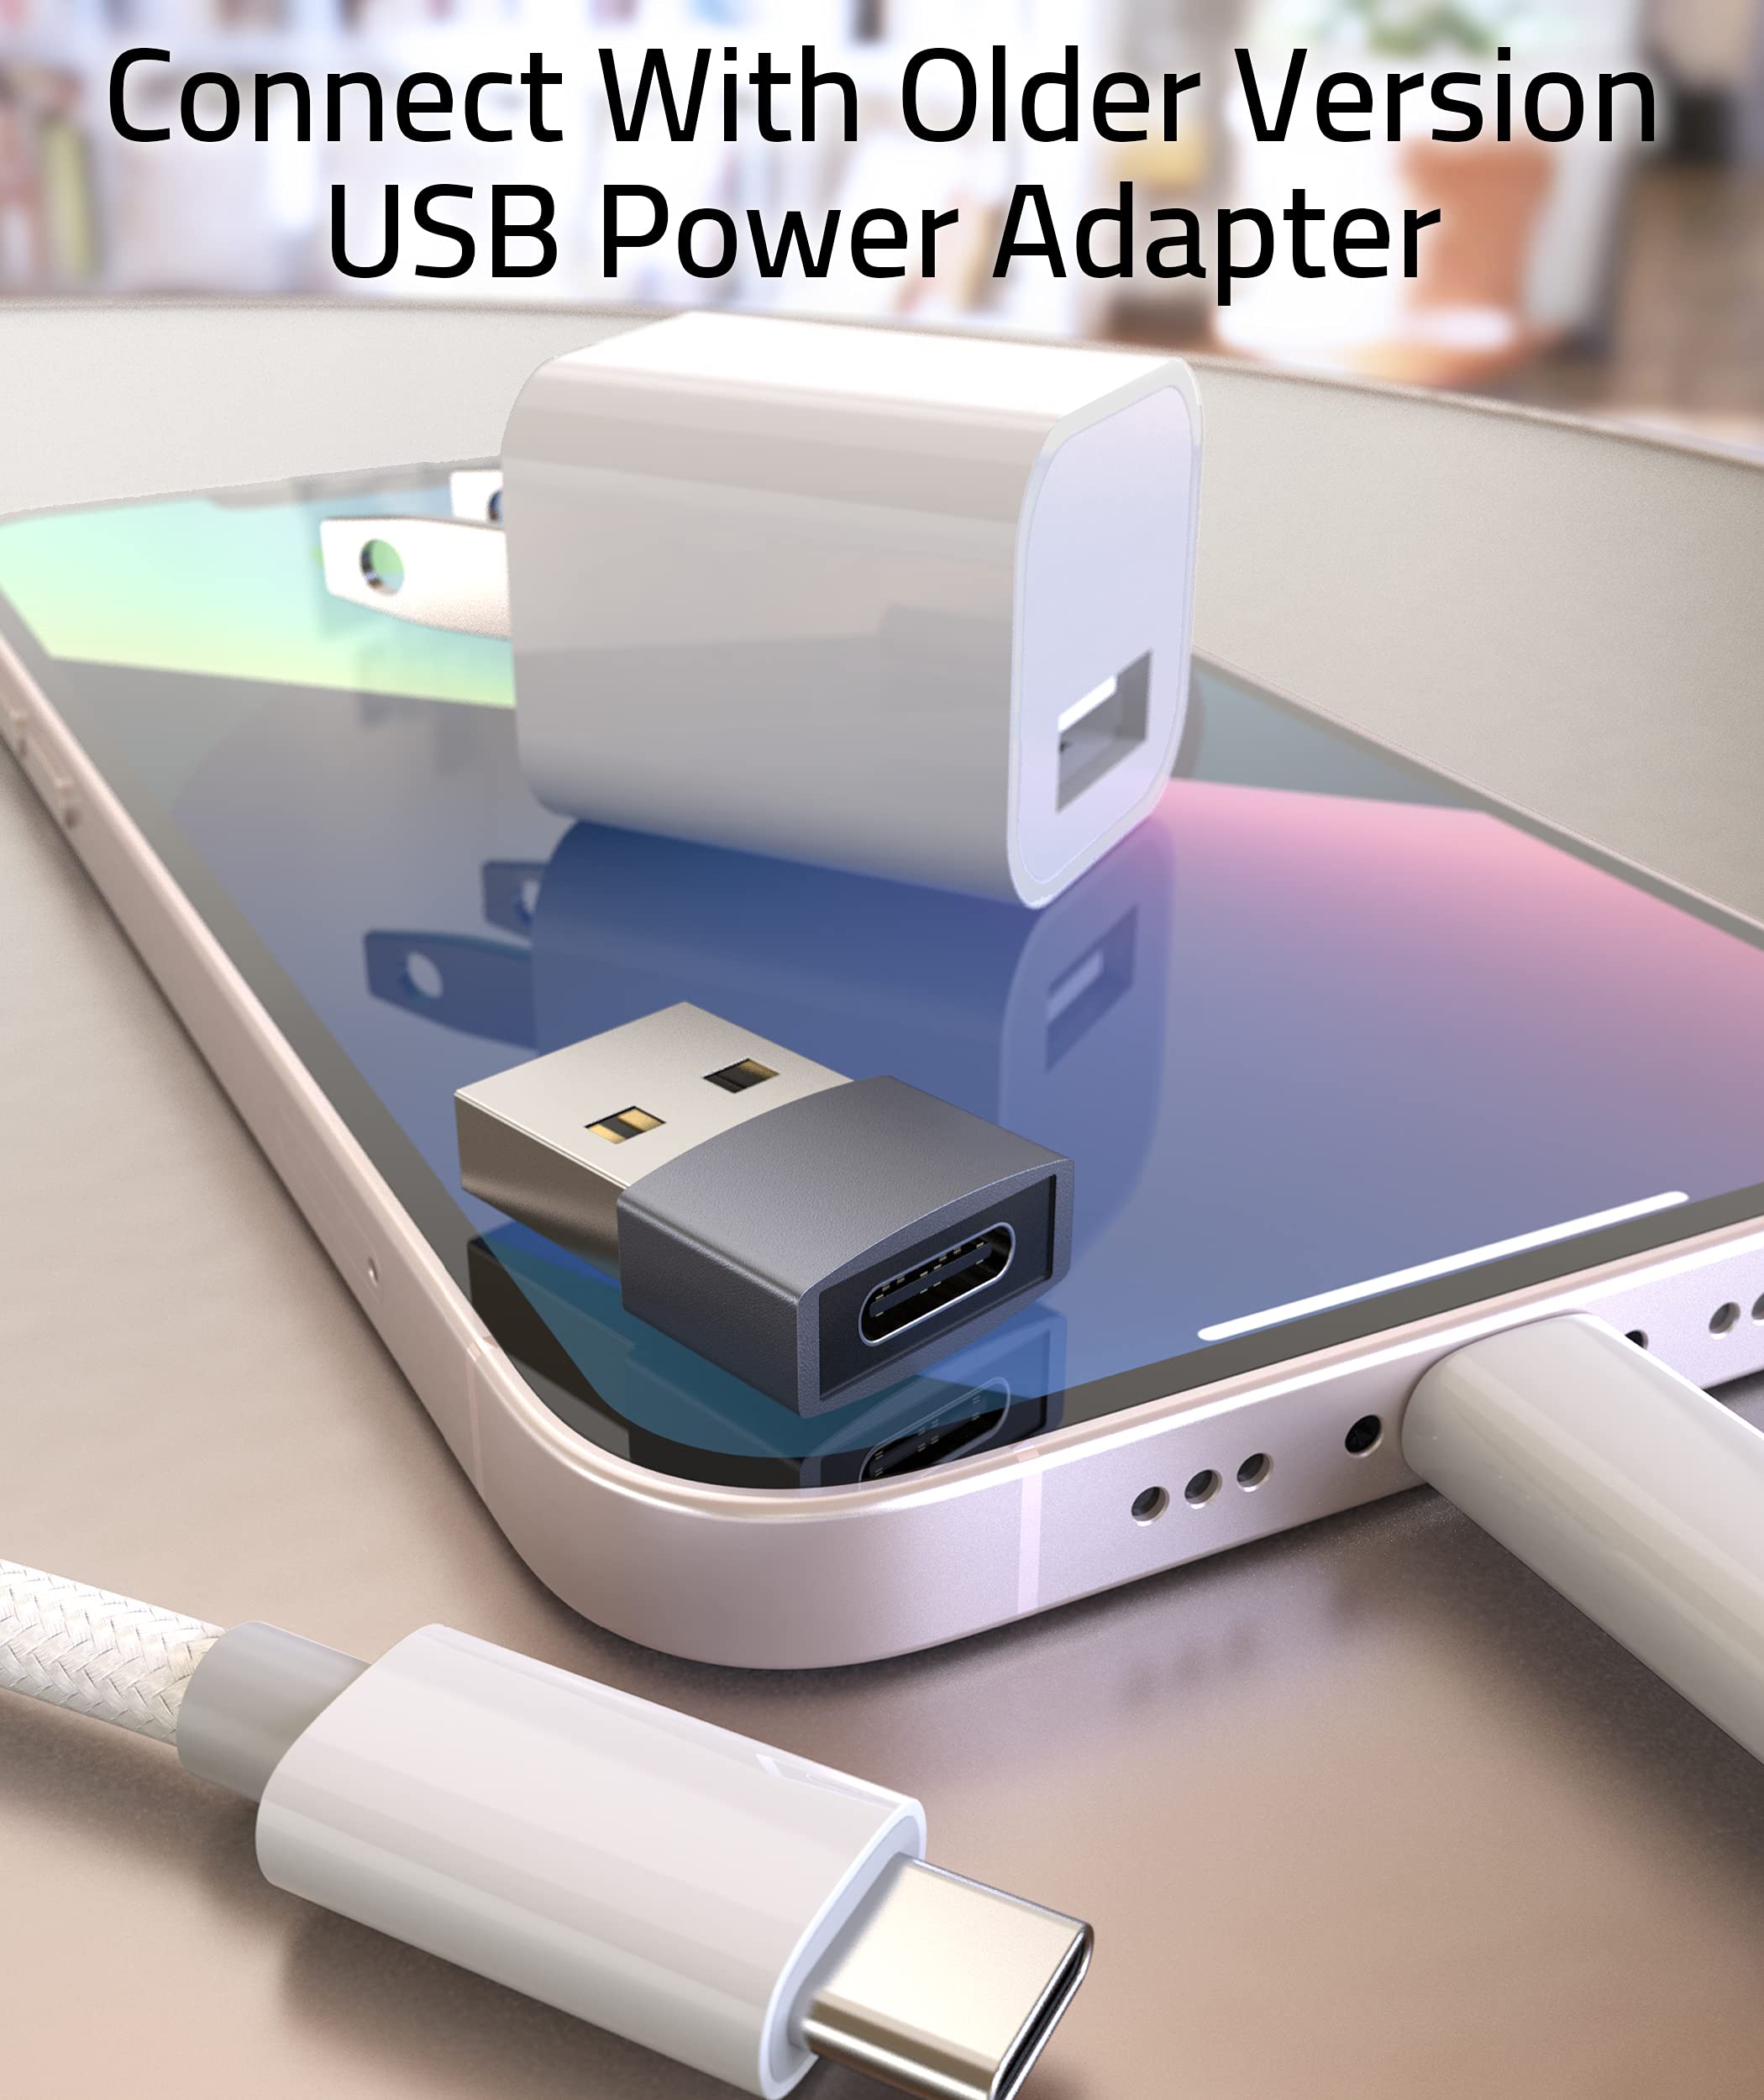 connect with older version USB Power Adapter